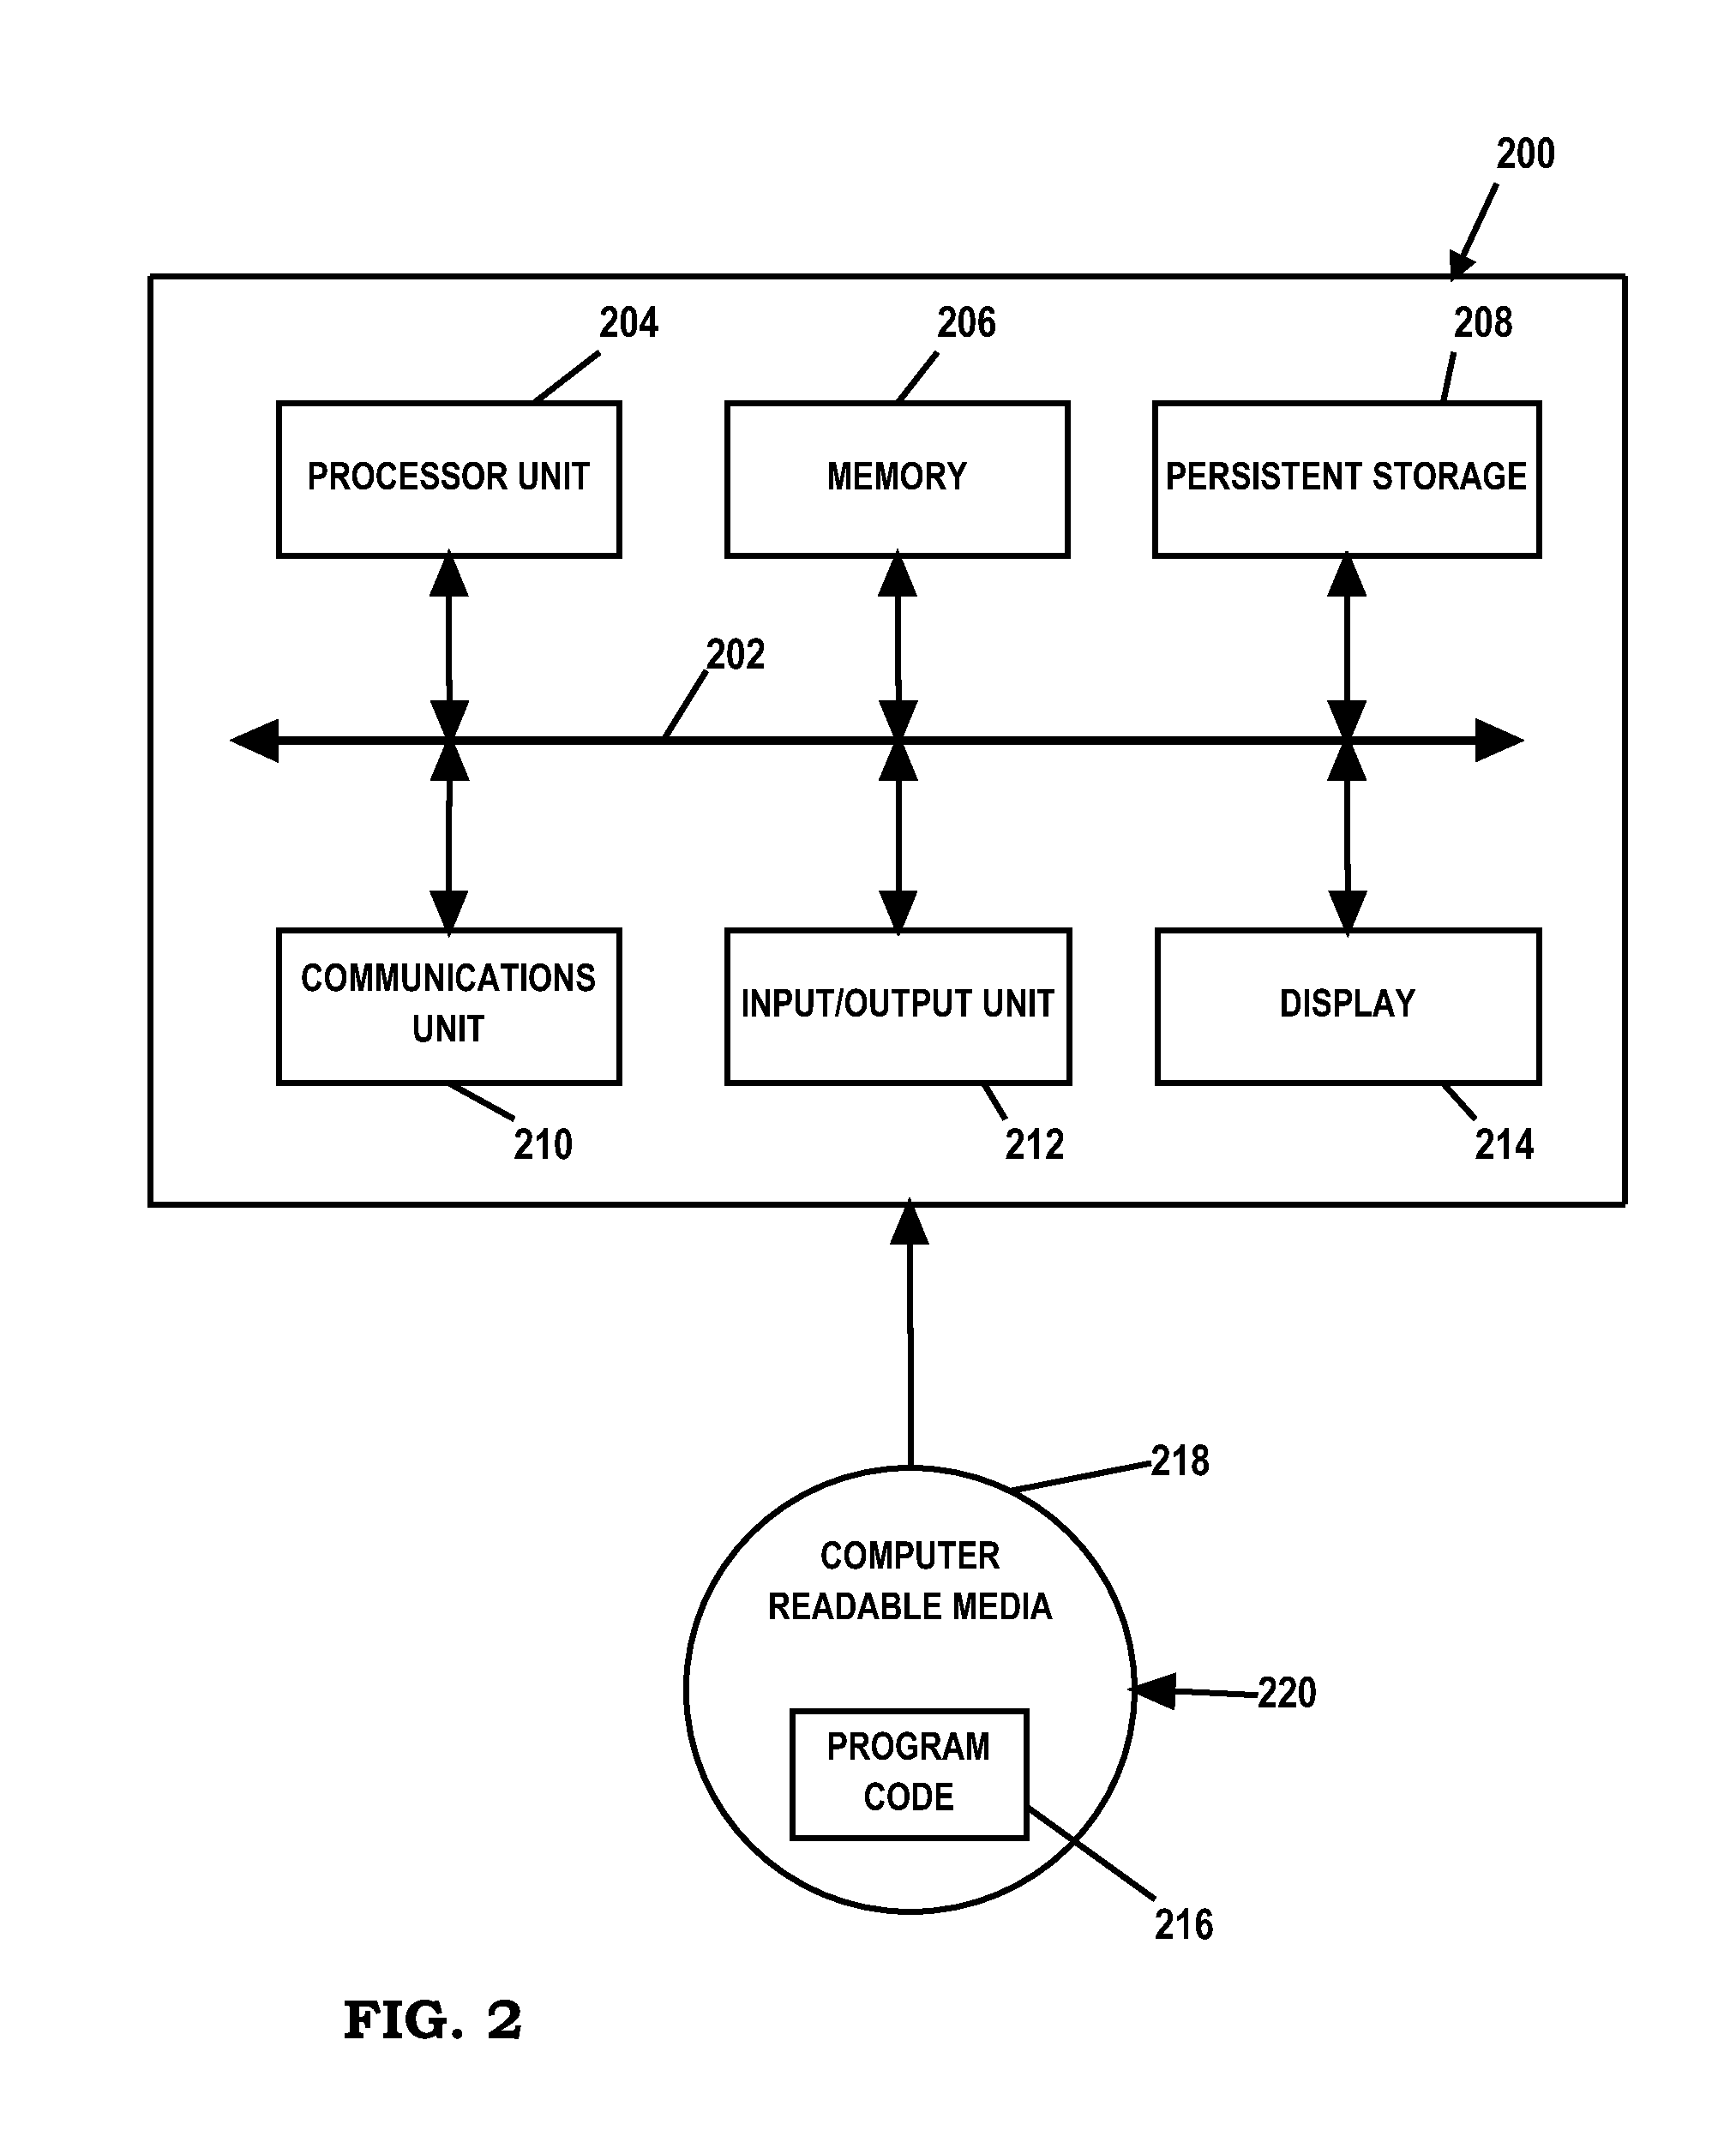 Multi-layer QOS management in a distributed computing environment